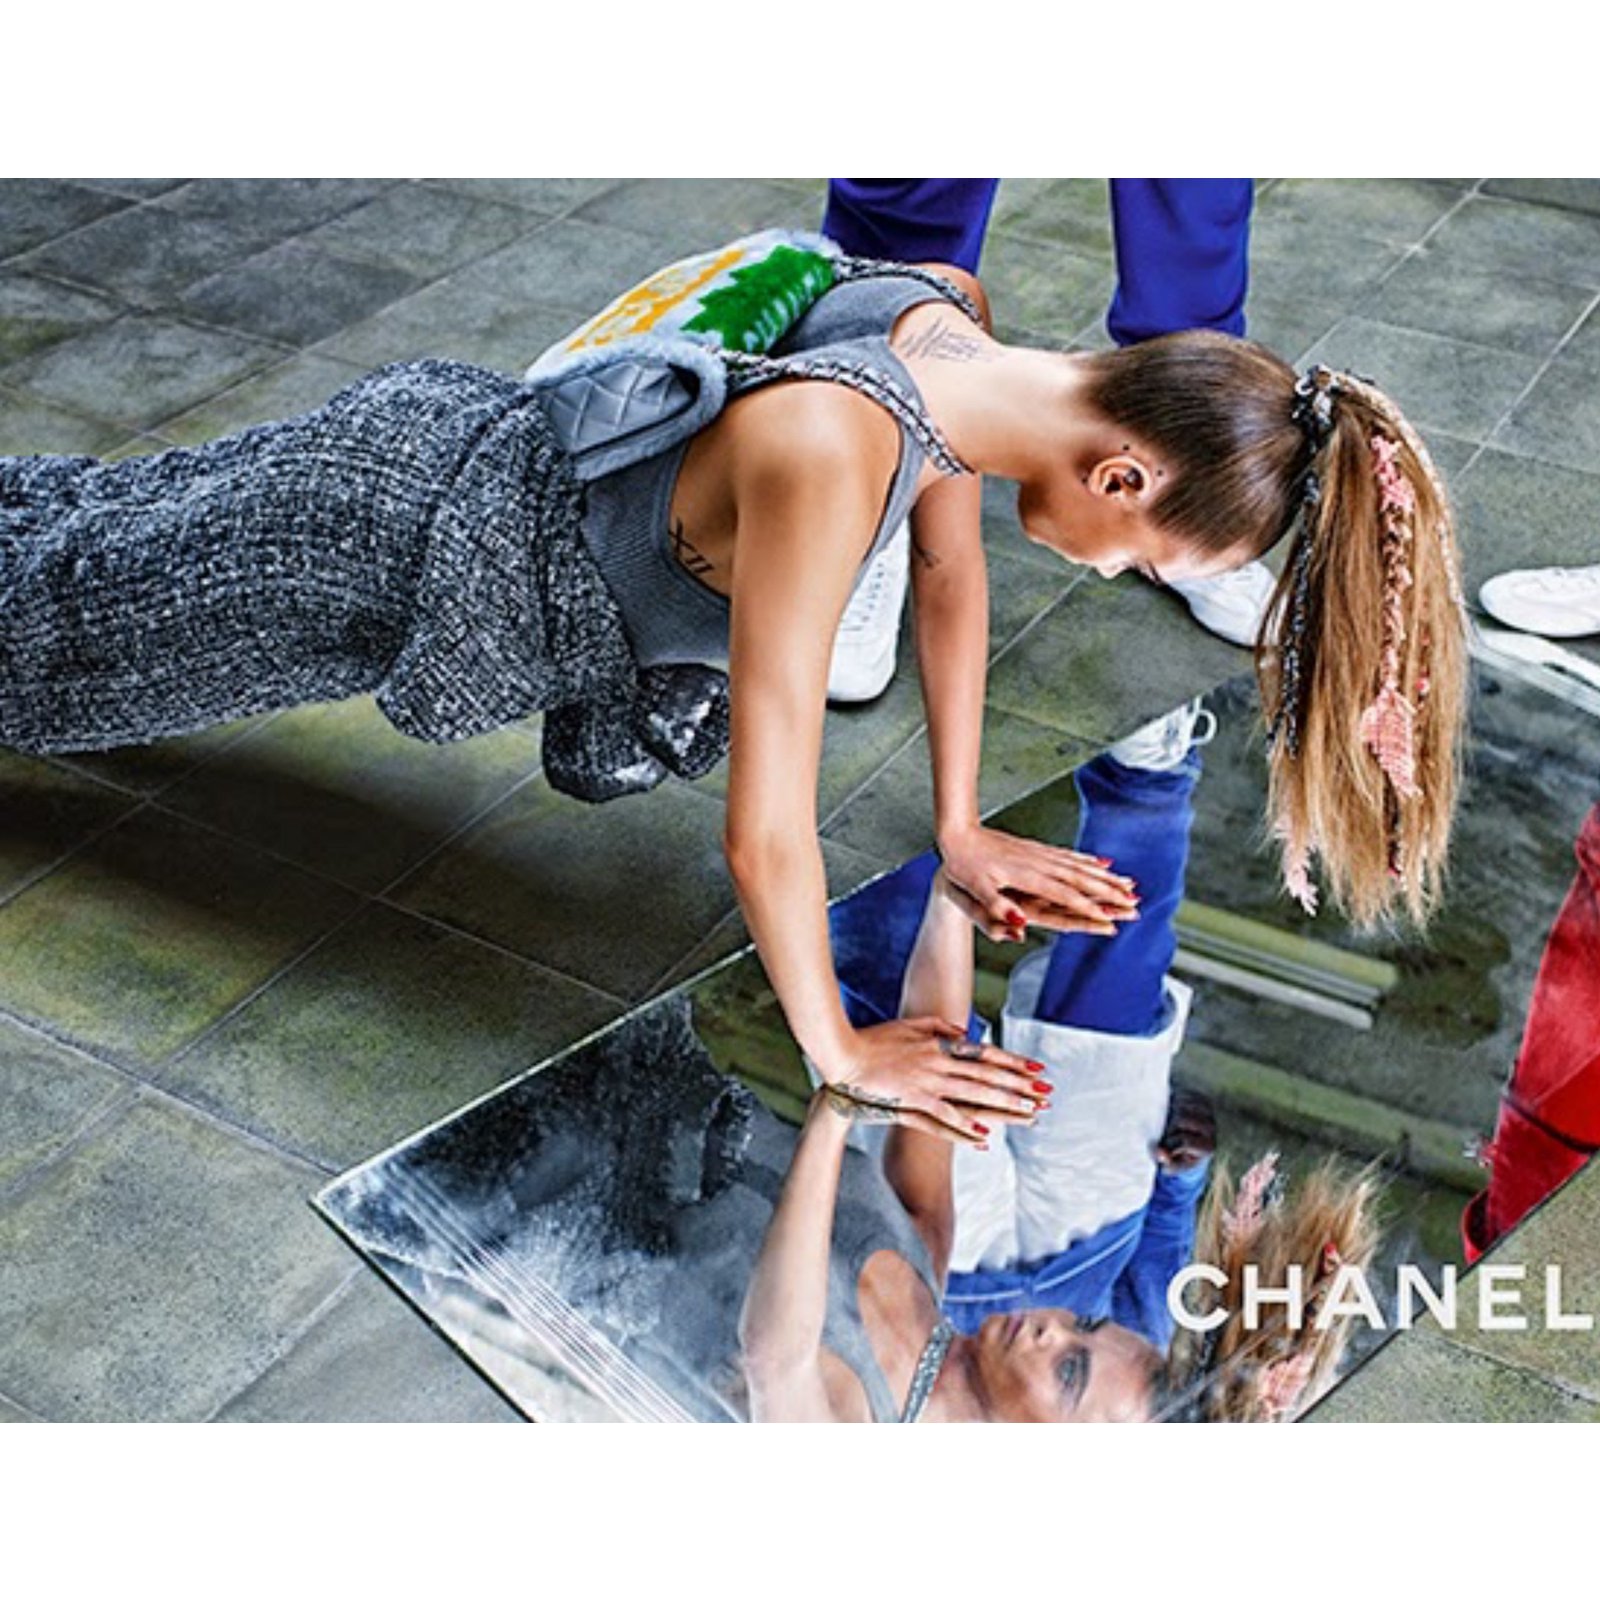 50 More Photos That Prove Chanel Bags Are The Reigning, 42% OFF